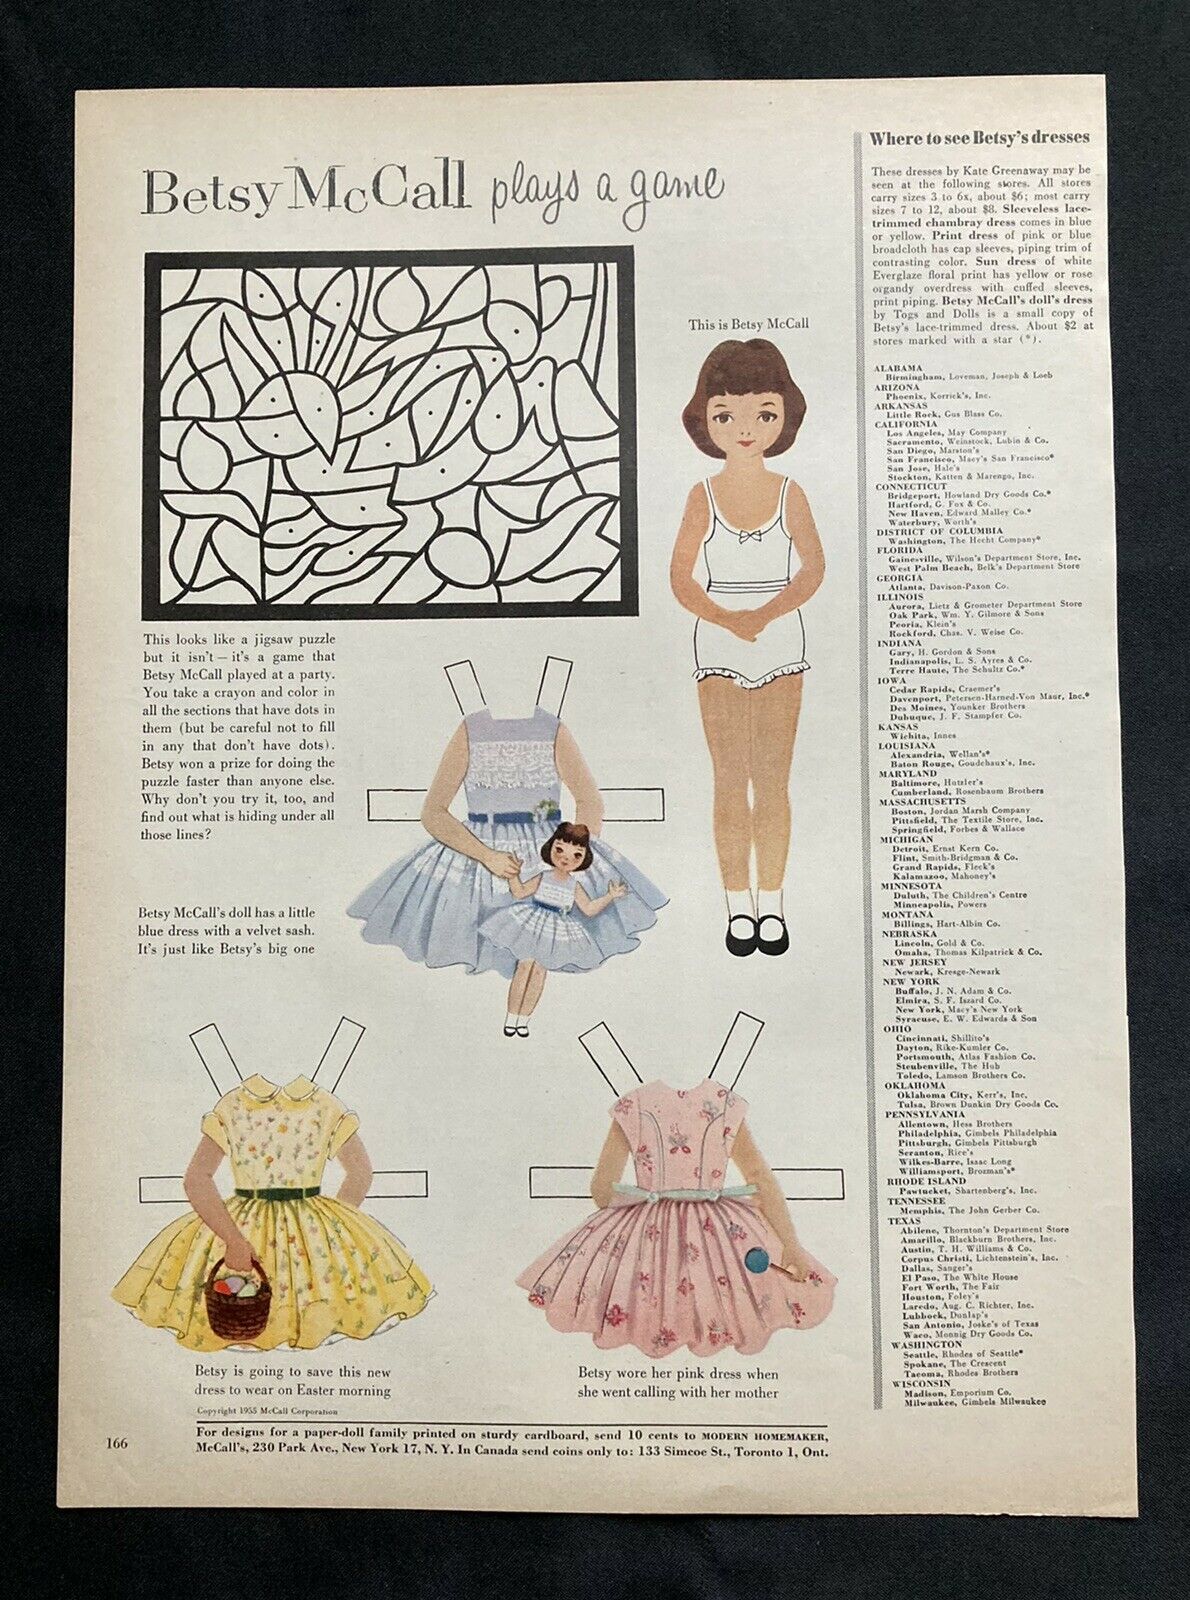 Vintage Betsy Mccall Mag. Paper Dolls, Betsy Mccall Plays A Game, March1955